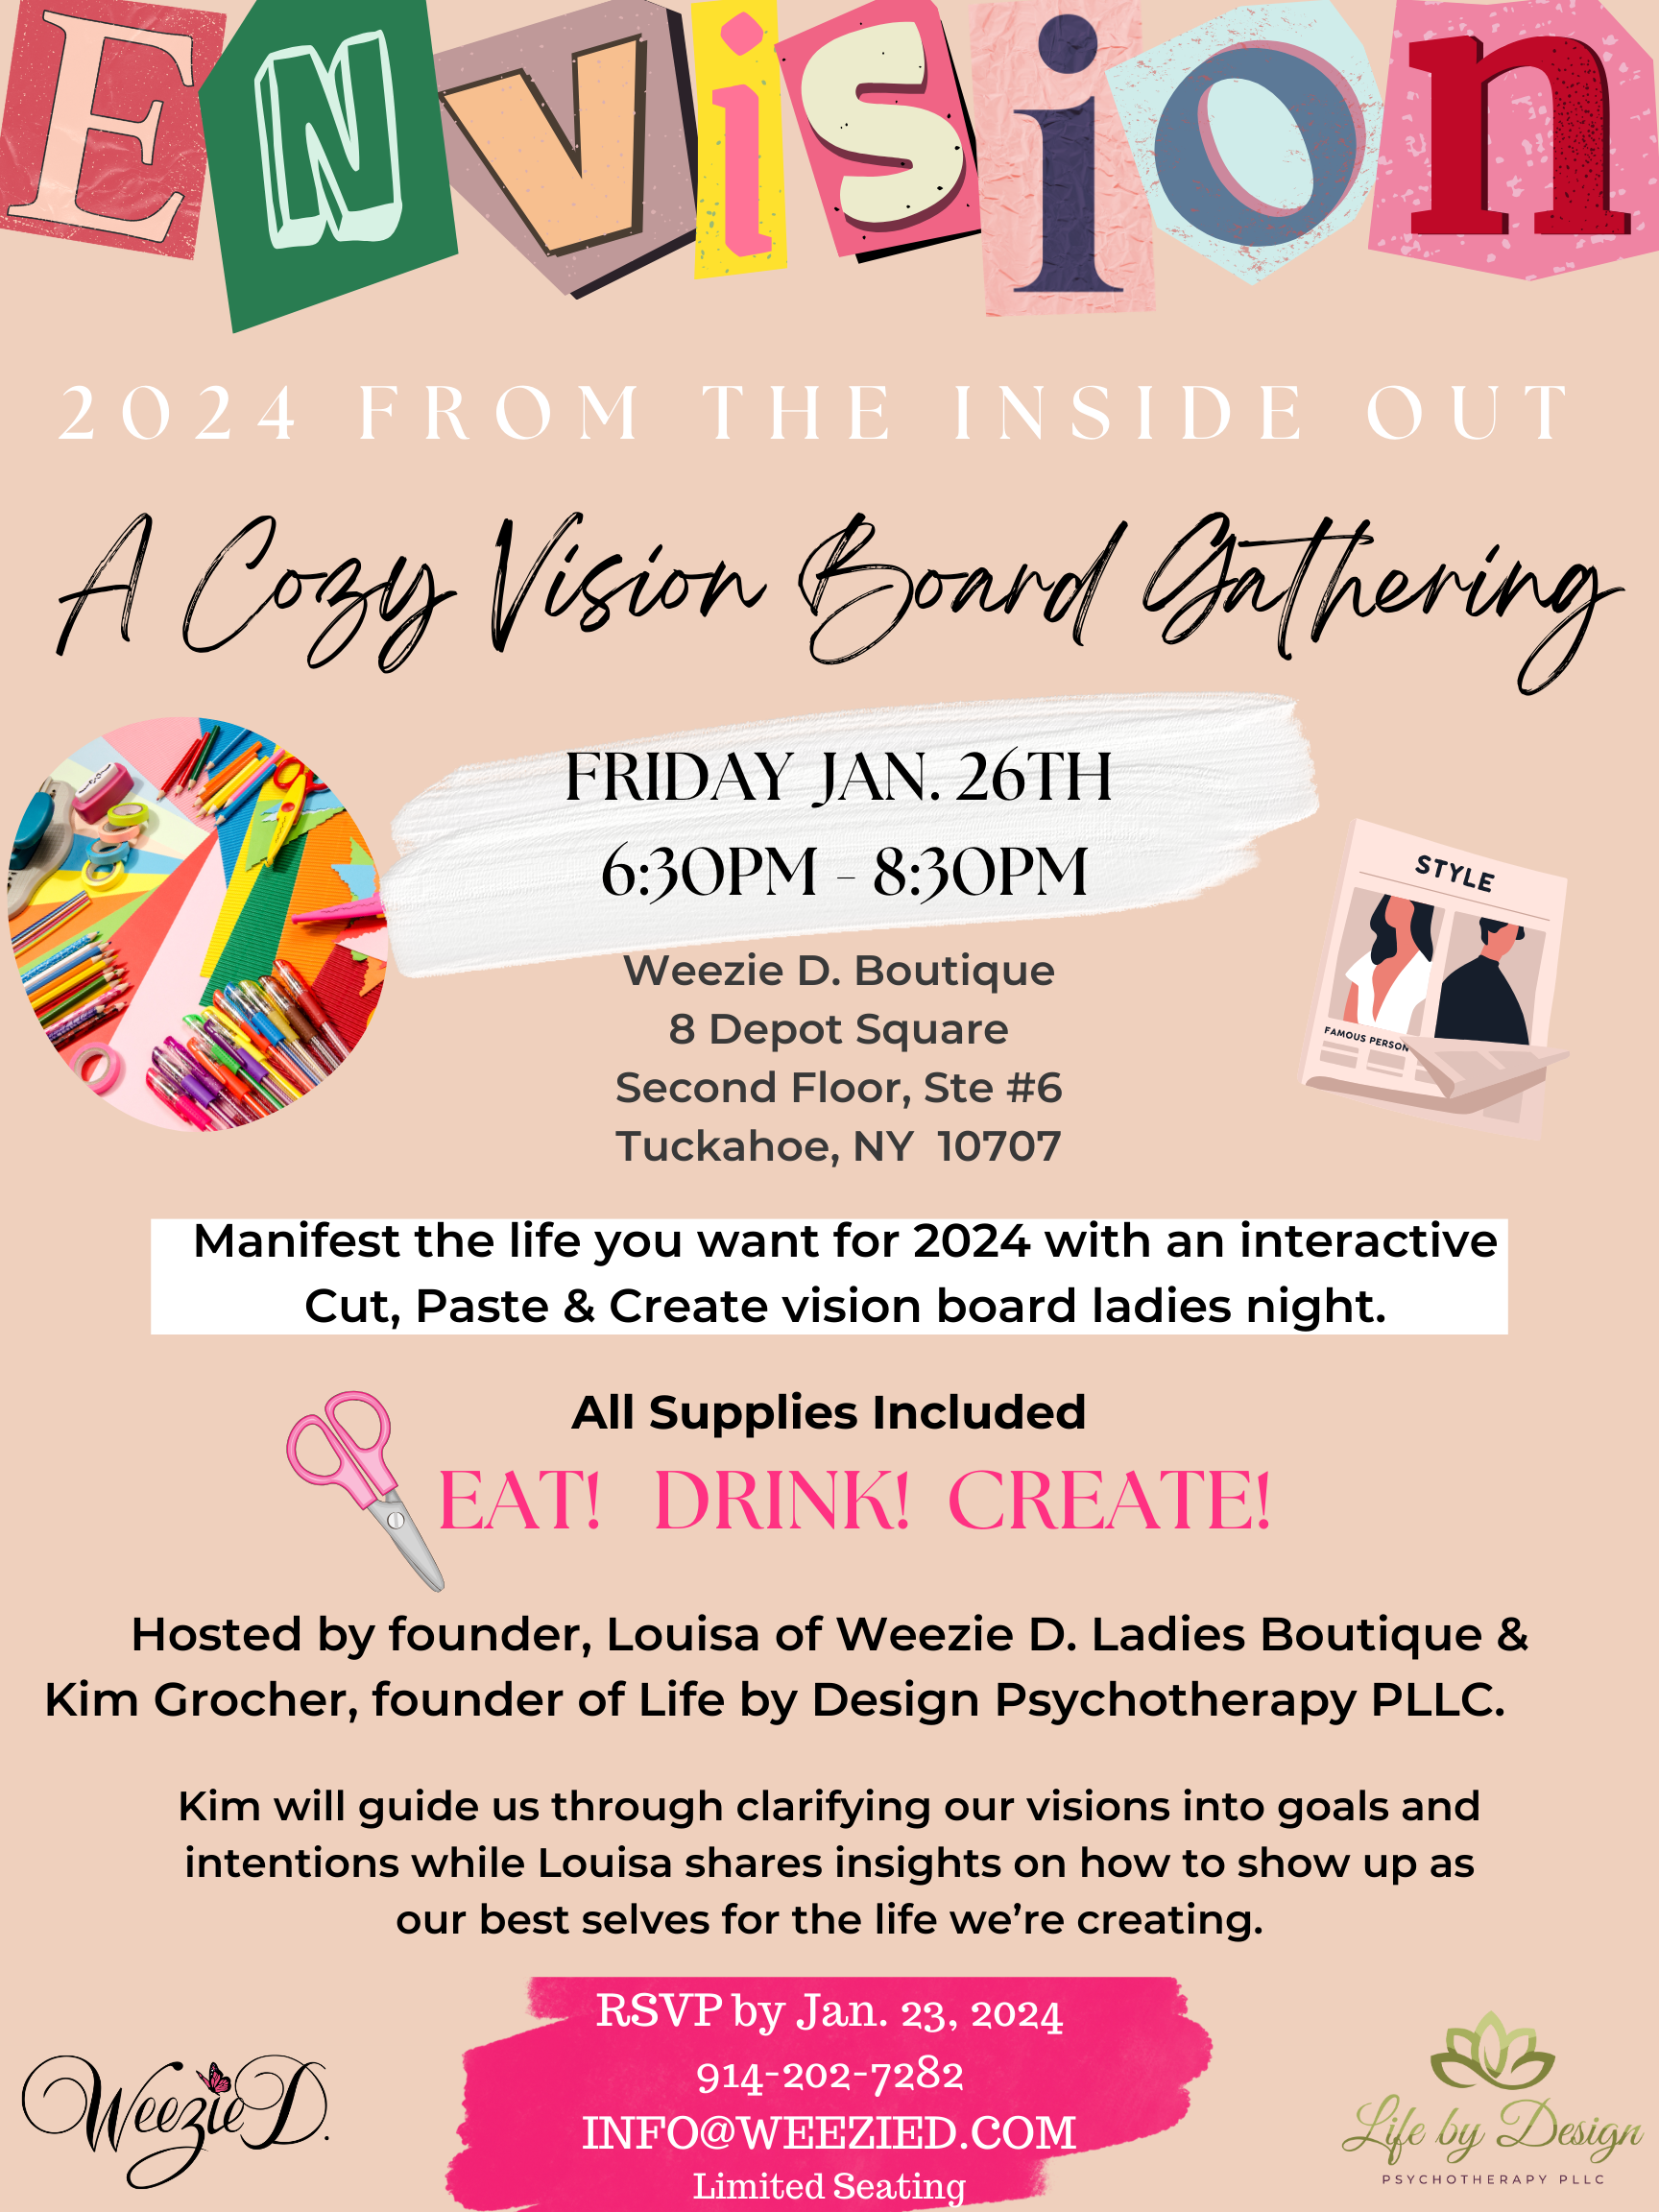 Envision 2024 From the Inside Out - A Cozy Vision Board Gathering